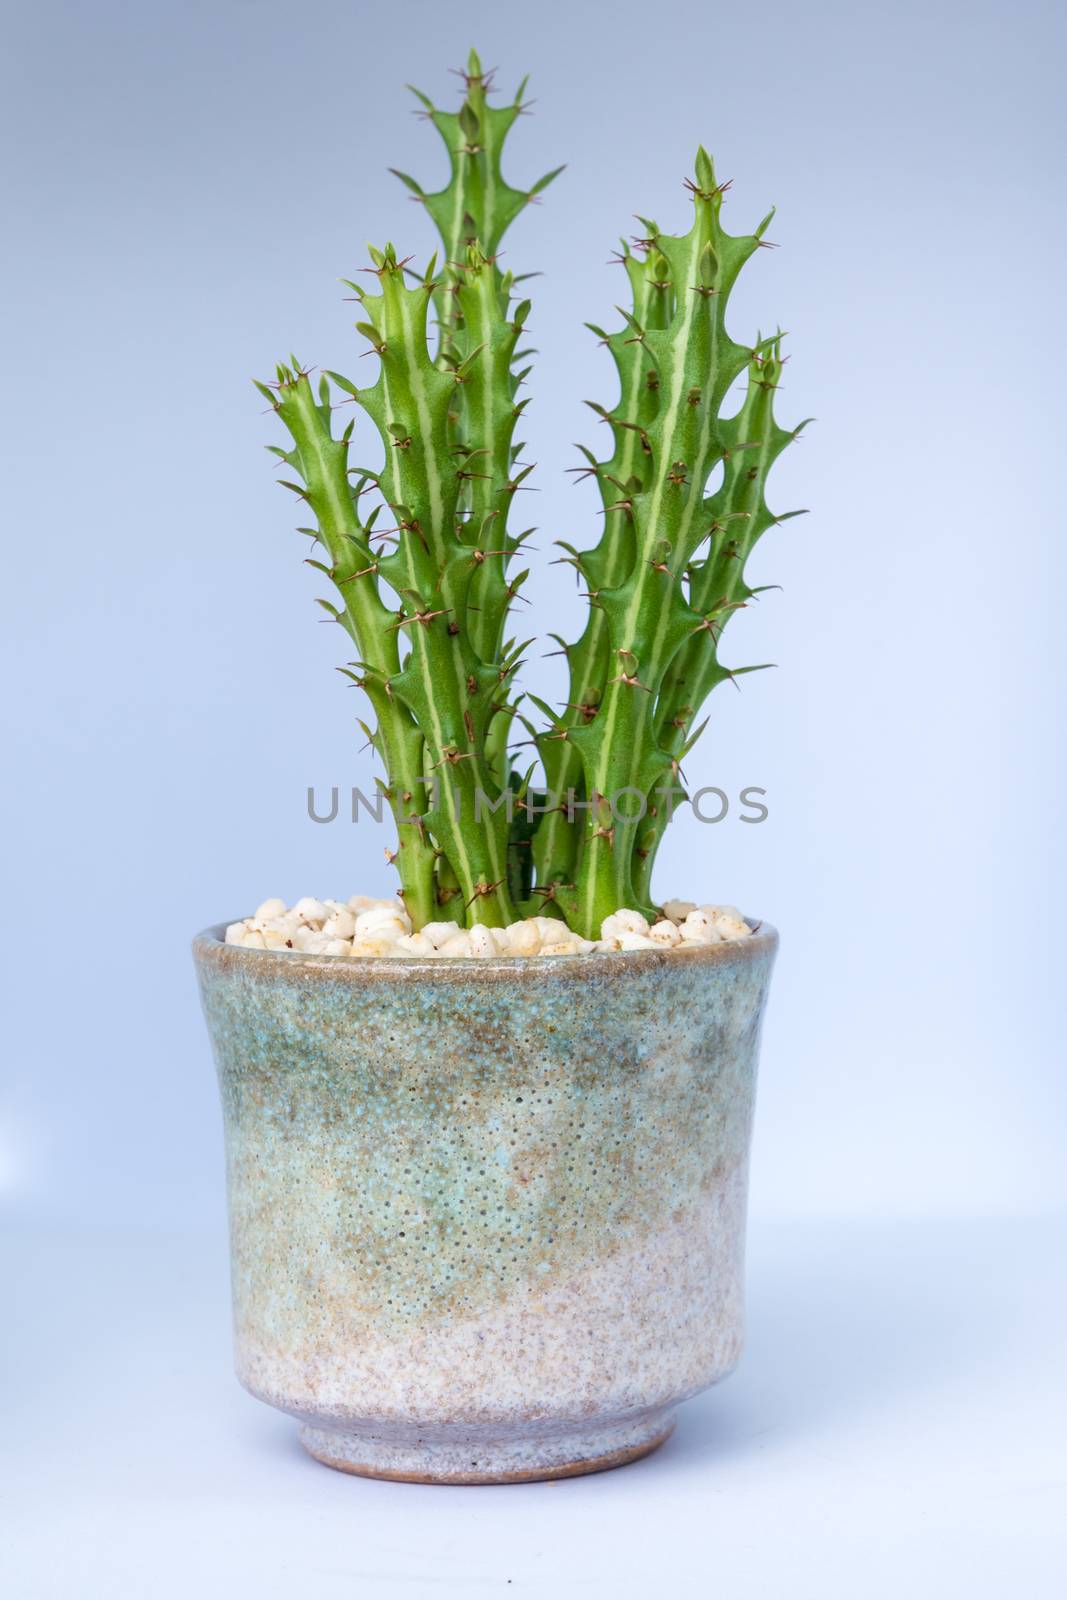 Euphorbia knuthii growing in the small ceramic pot by Satakorn